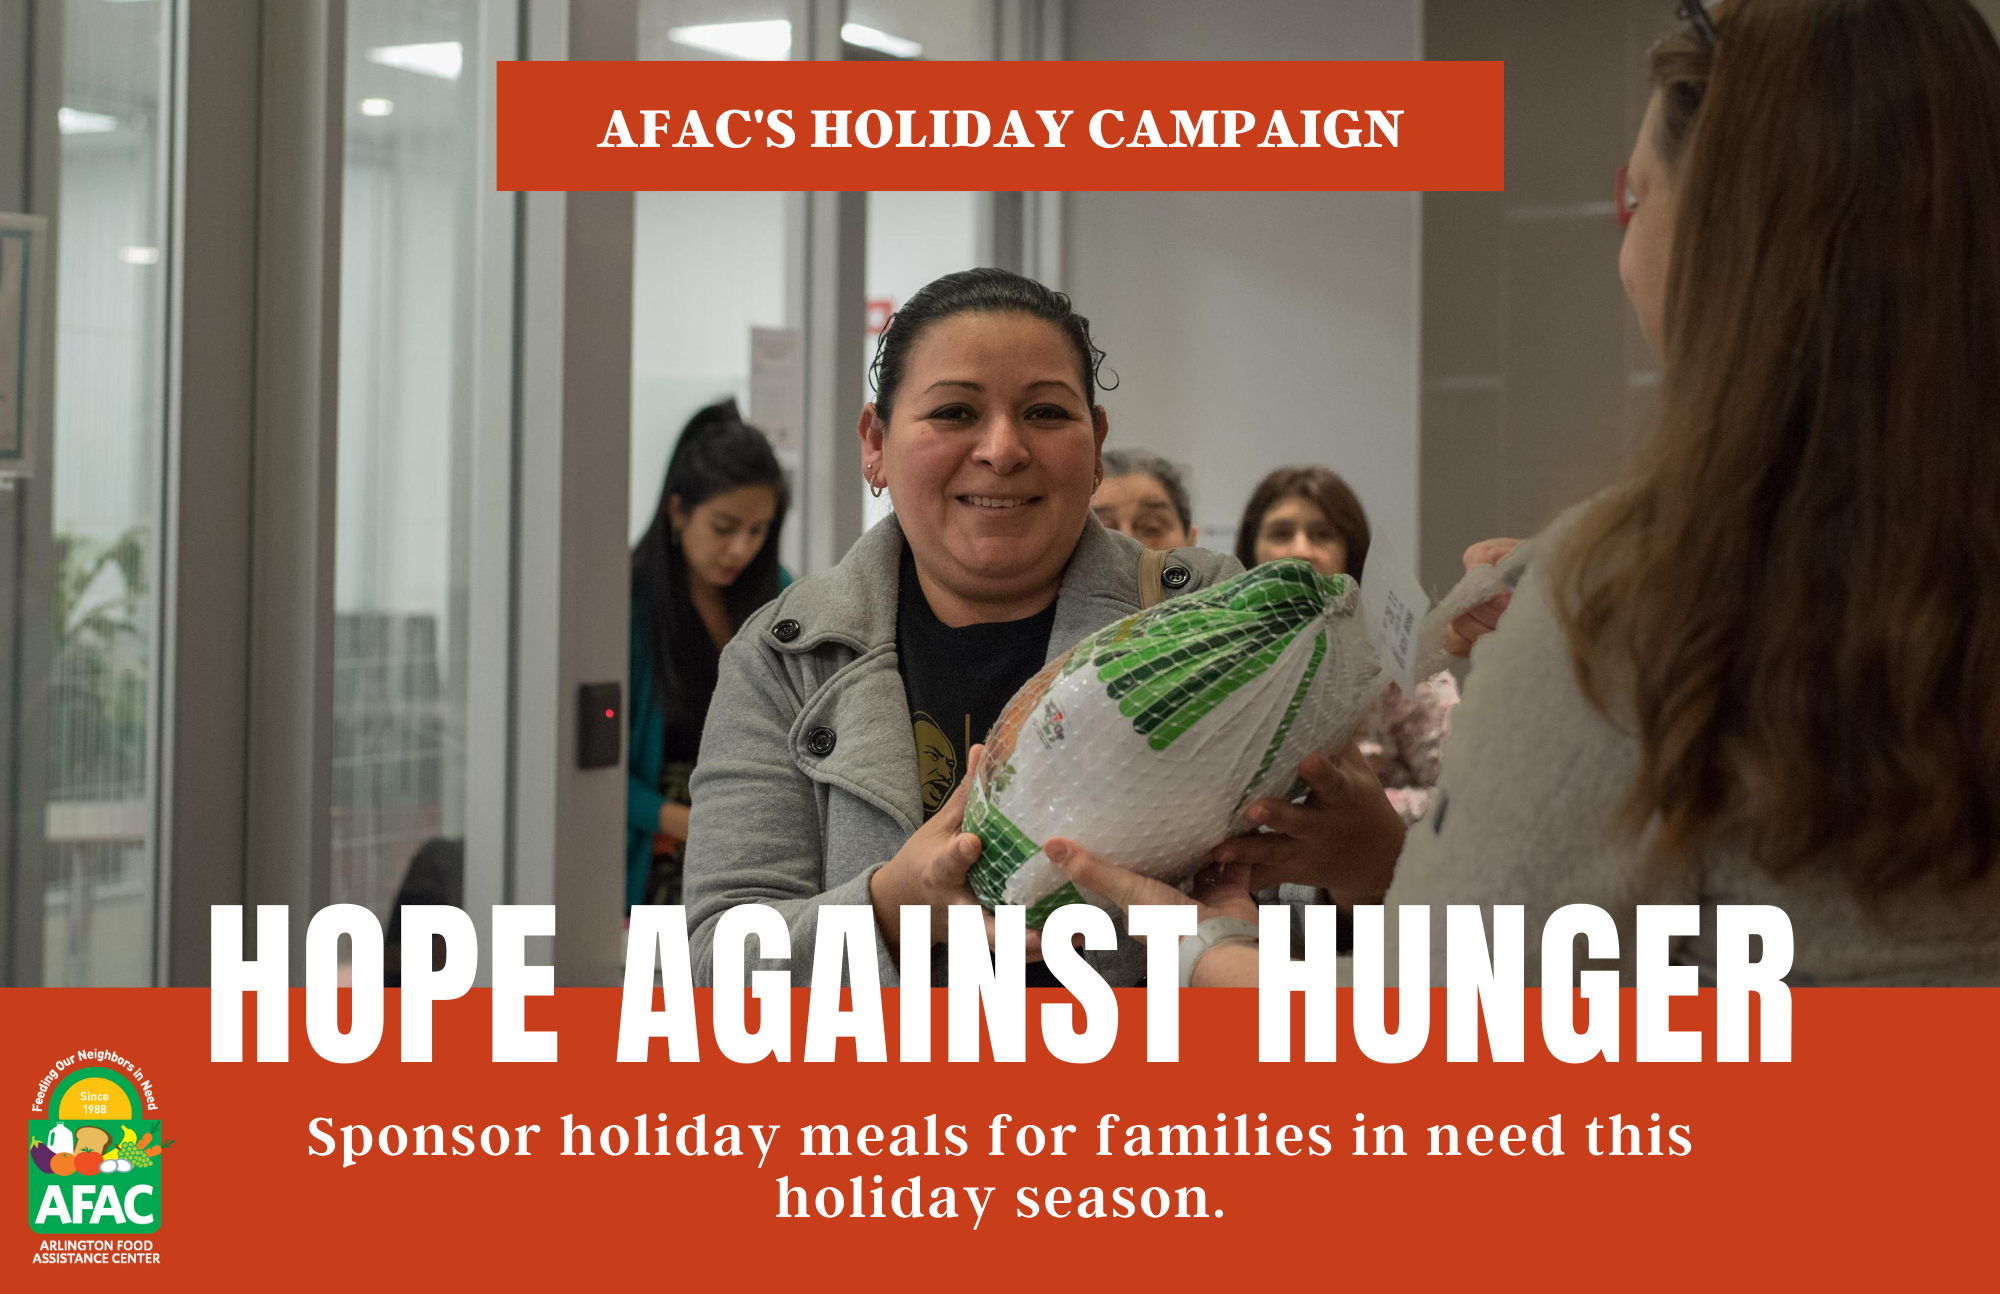 woman being handed a turkey with words "Hope Against Hunger, sponsor holiday meals for families in need this holiday season". AFAC logo in corner.